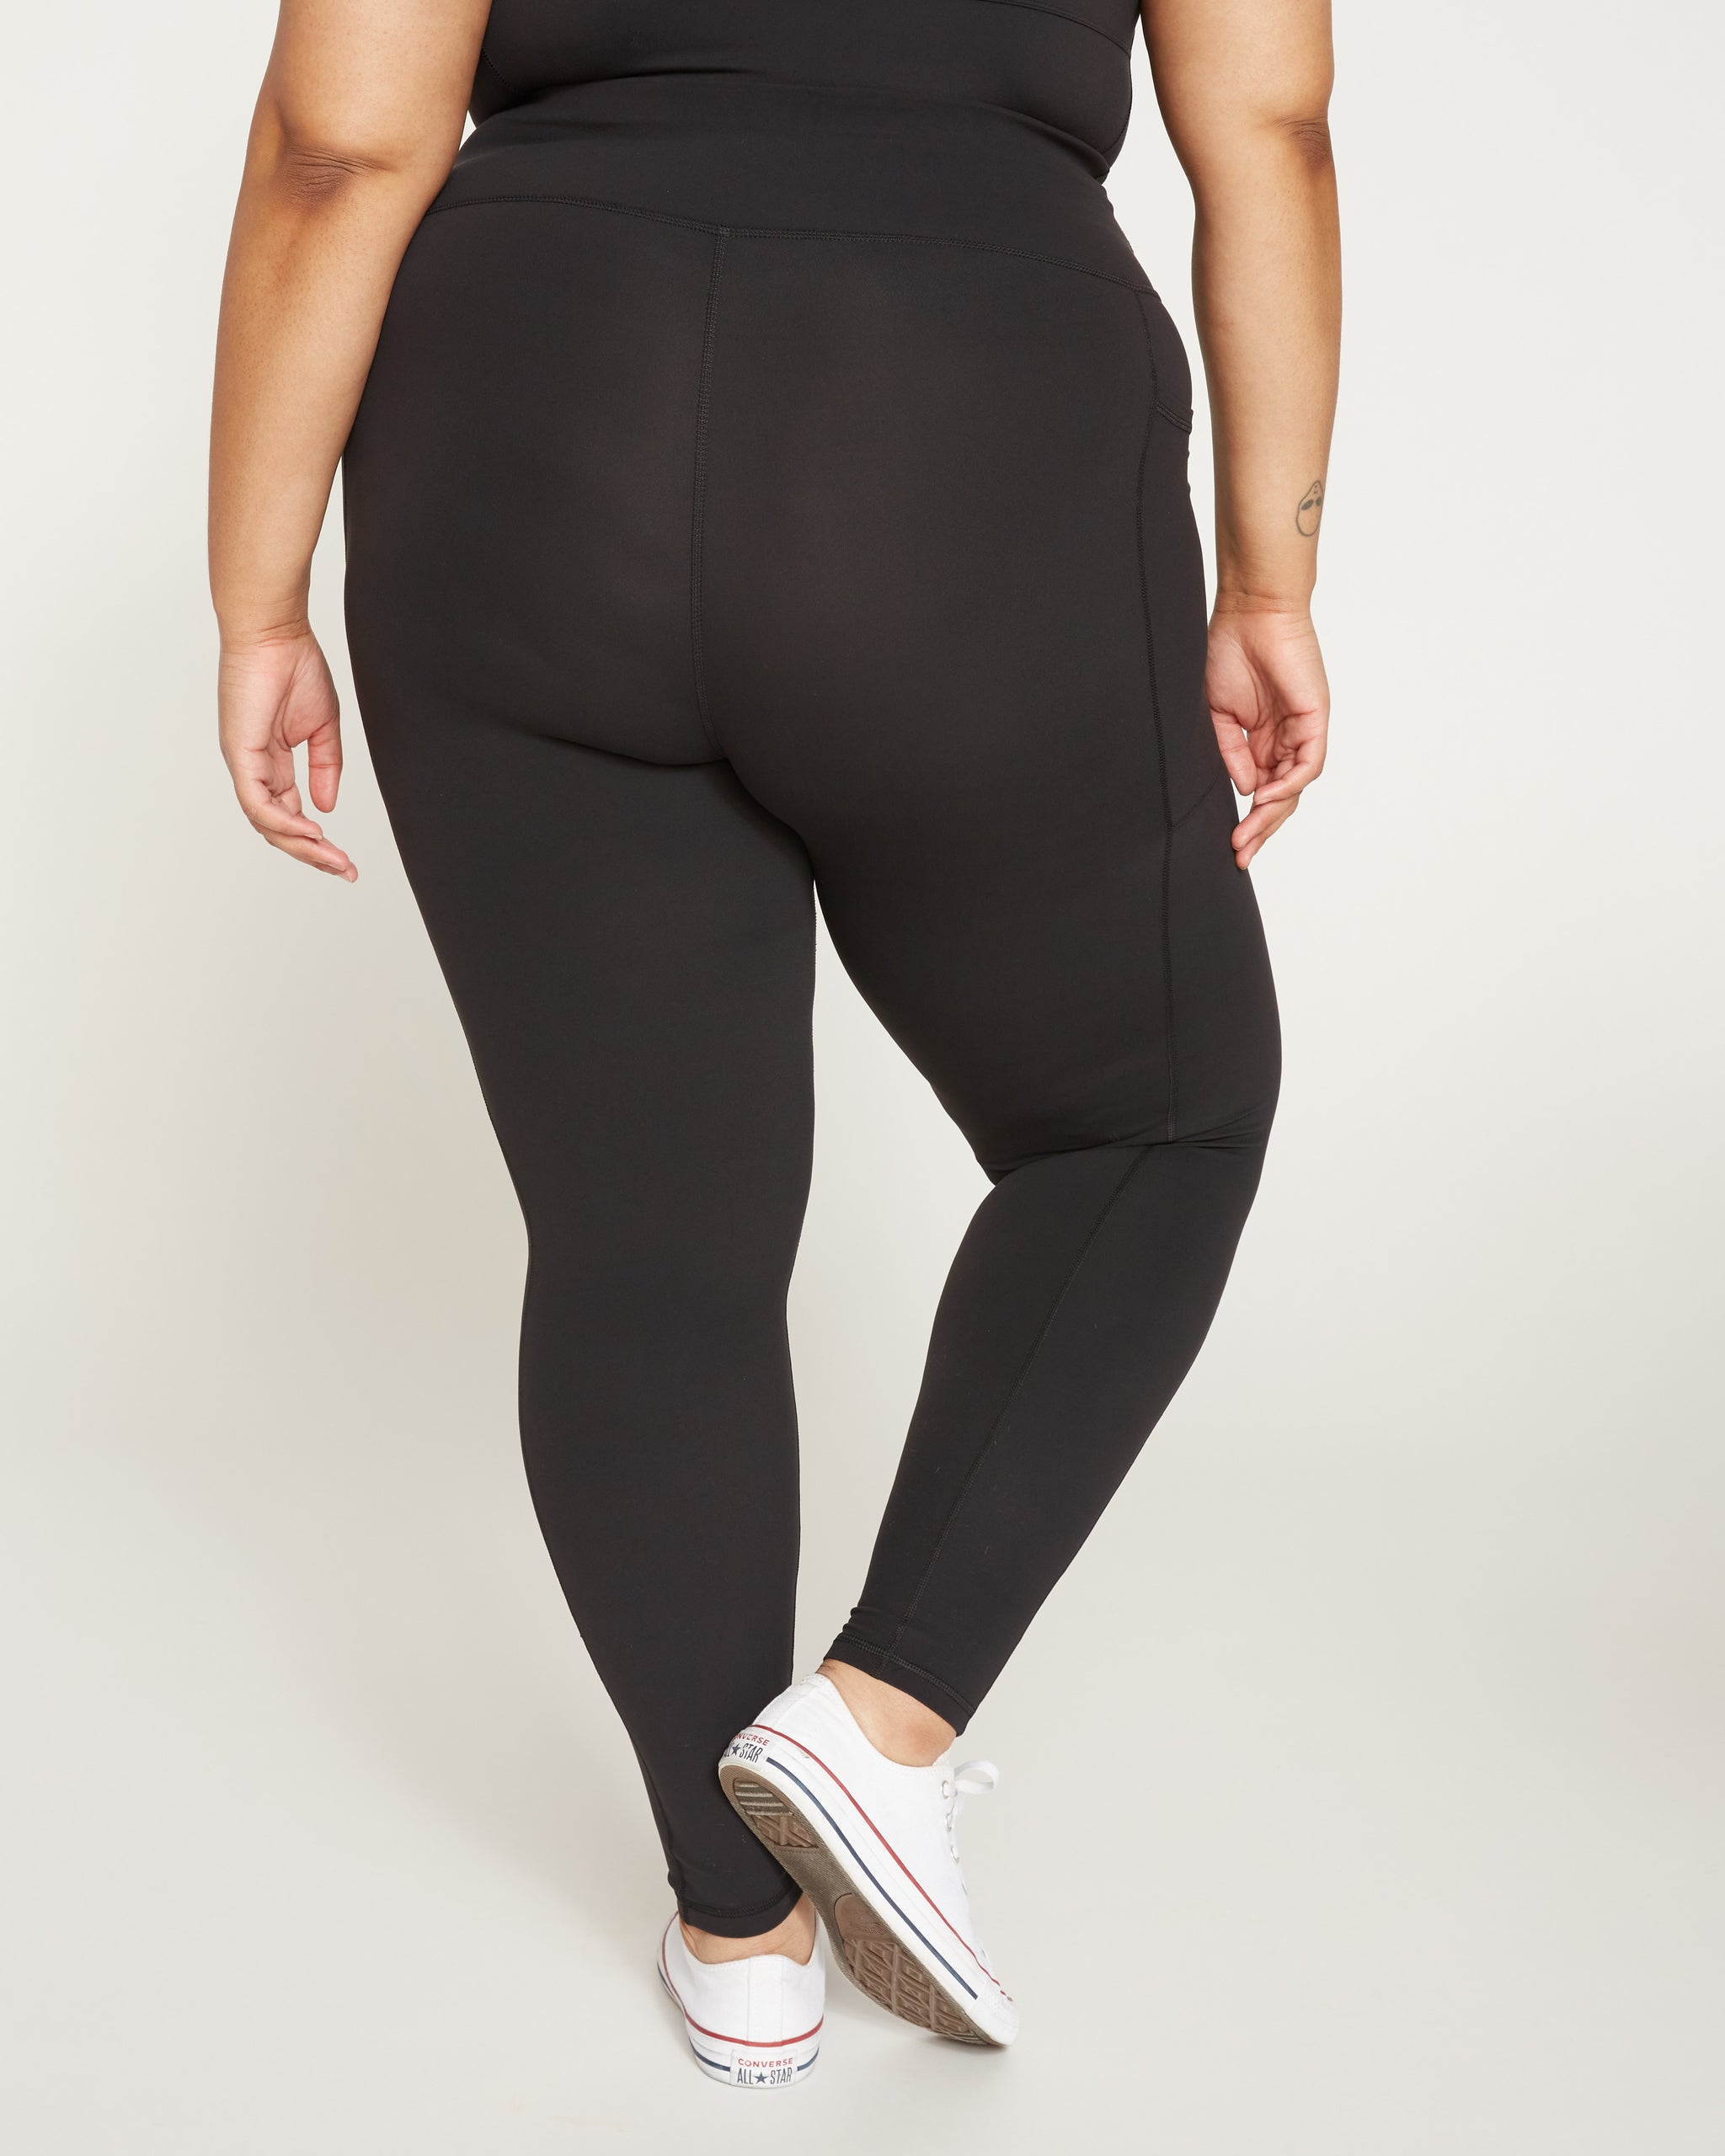 PLUS SIZE BLACK JEGGINGS WITH REAL POCKETS – Luv 21 Leggings